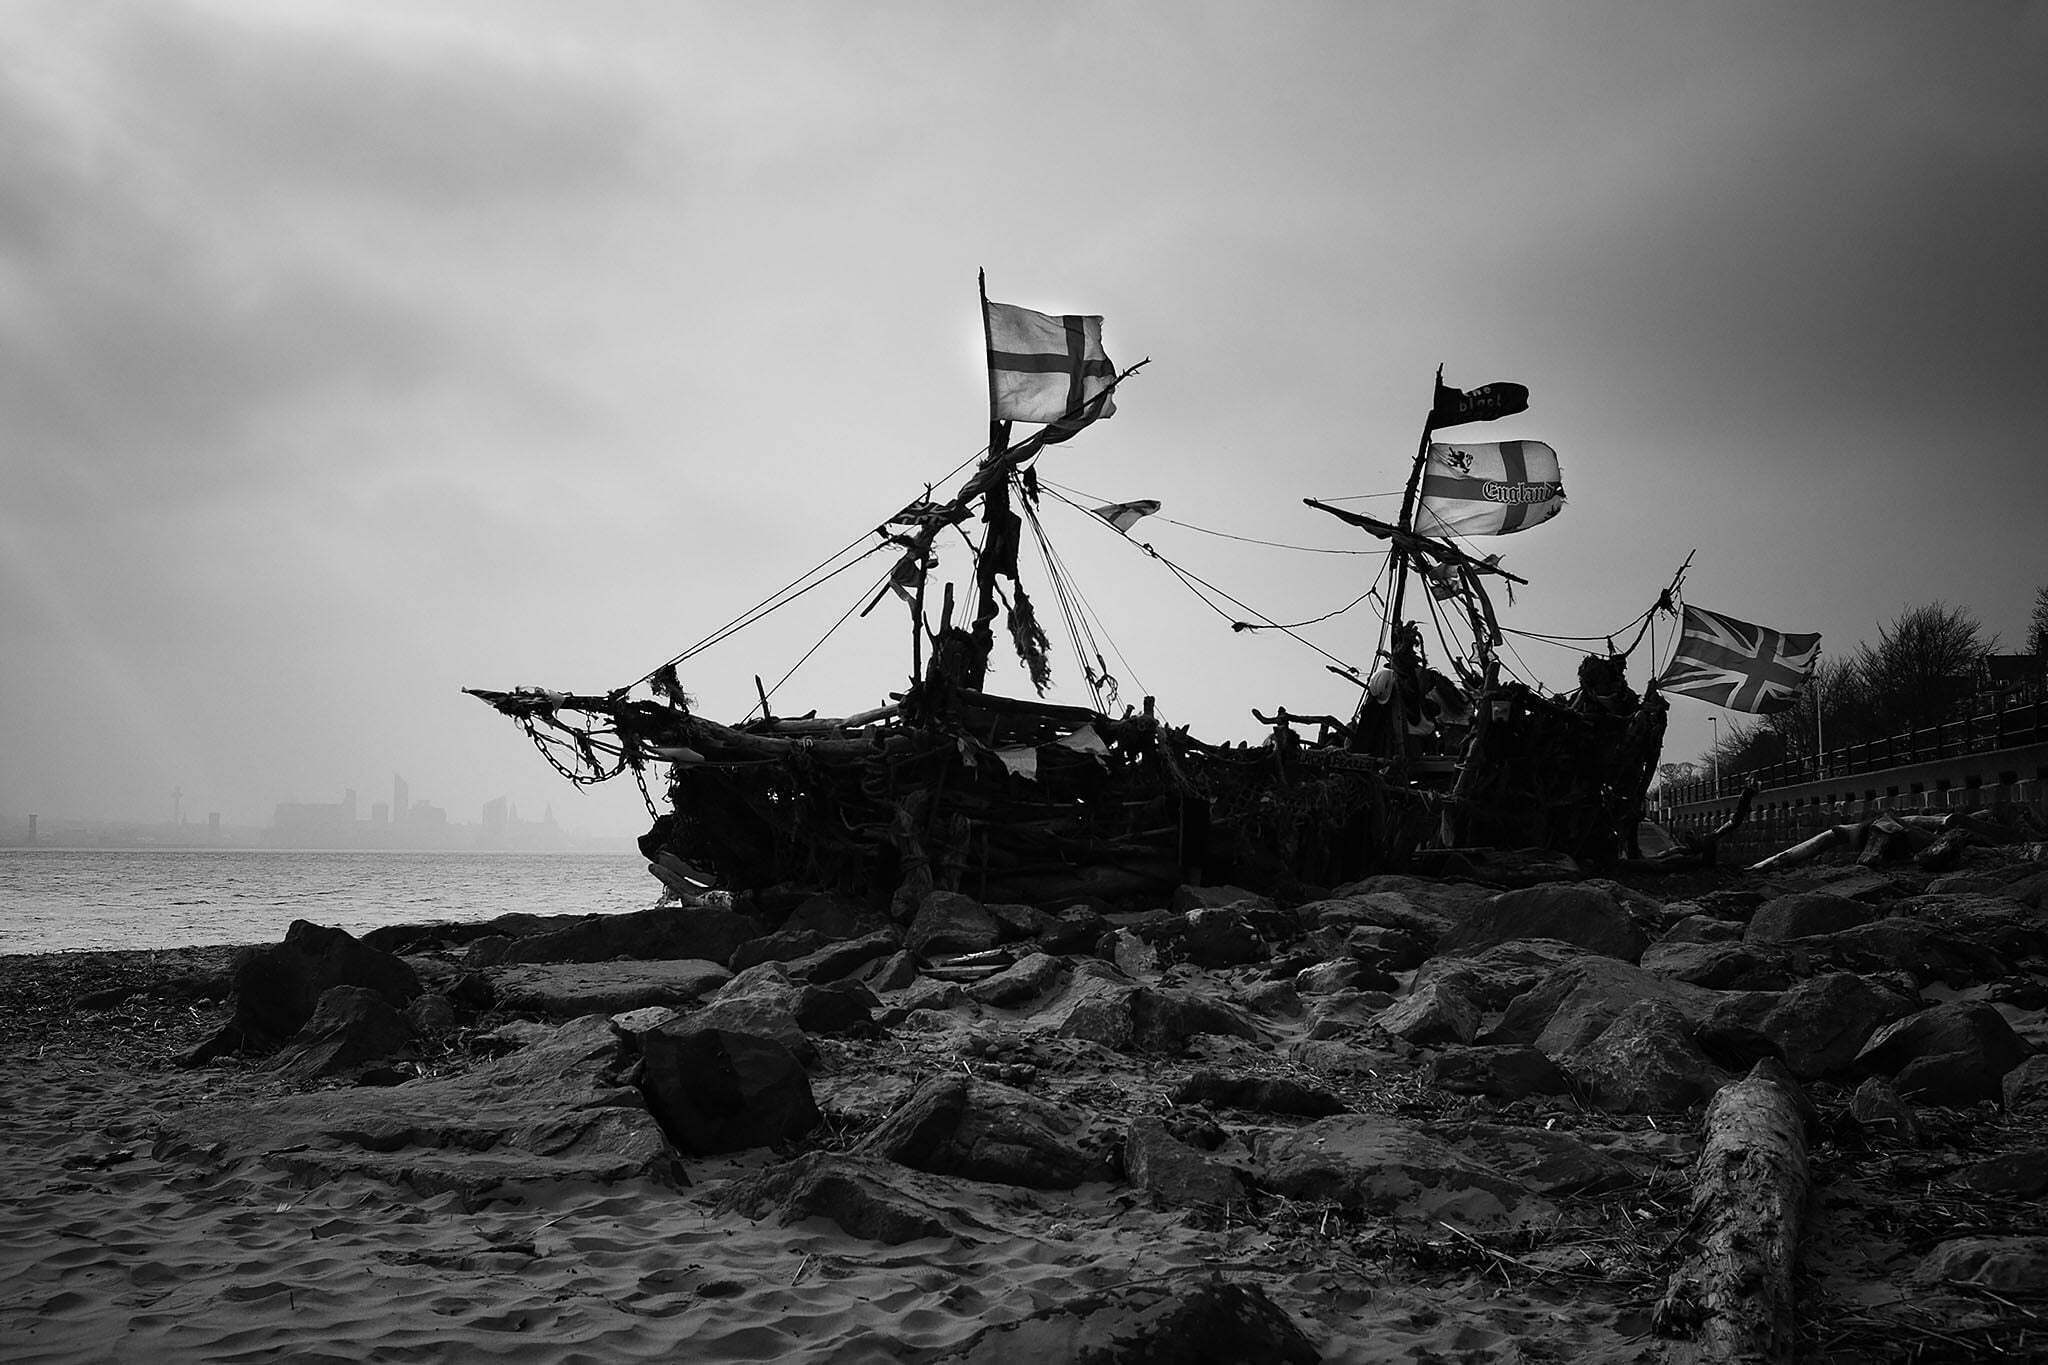 The driftwood pirate ship of New Brighton